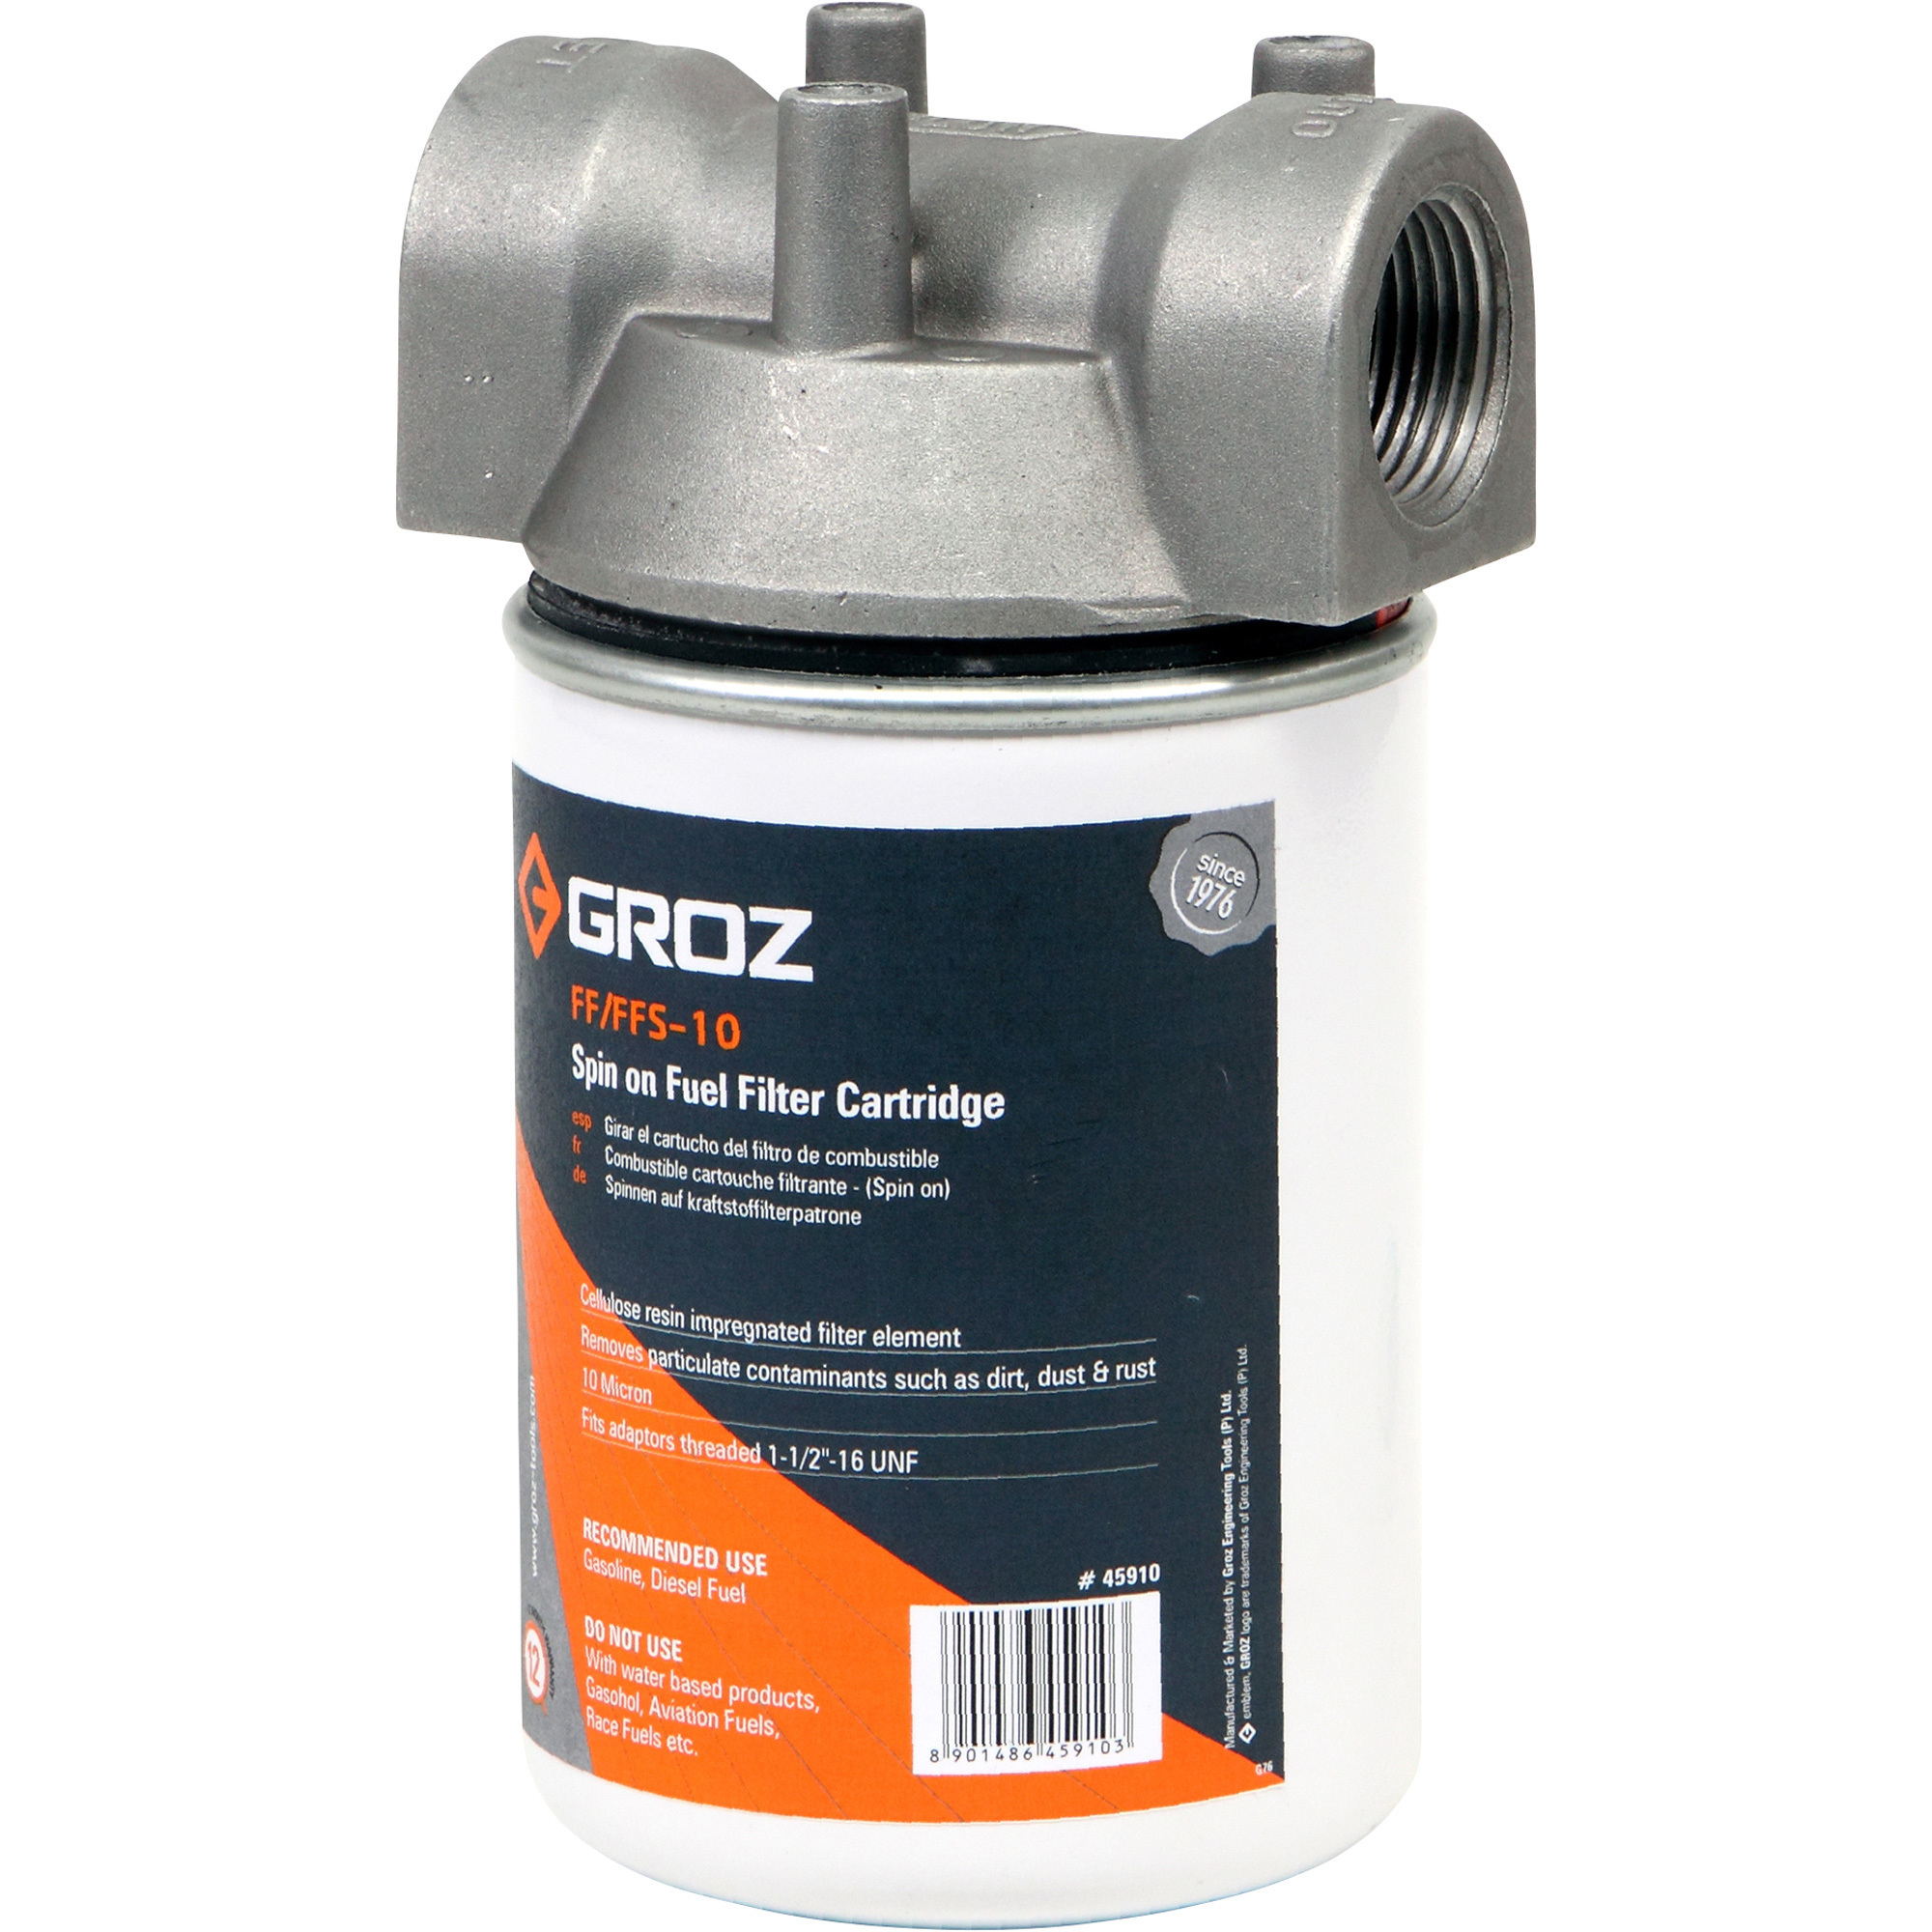 GROZ Fuel Filter with Spin On Cartridge, 10 Micron, 20 GPM, 3/4Inch NPT Thread, Model FFS/10/3-4/N